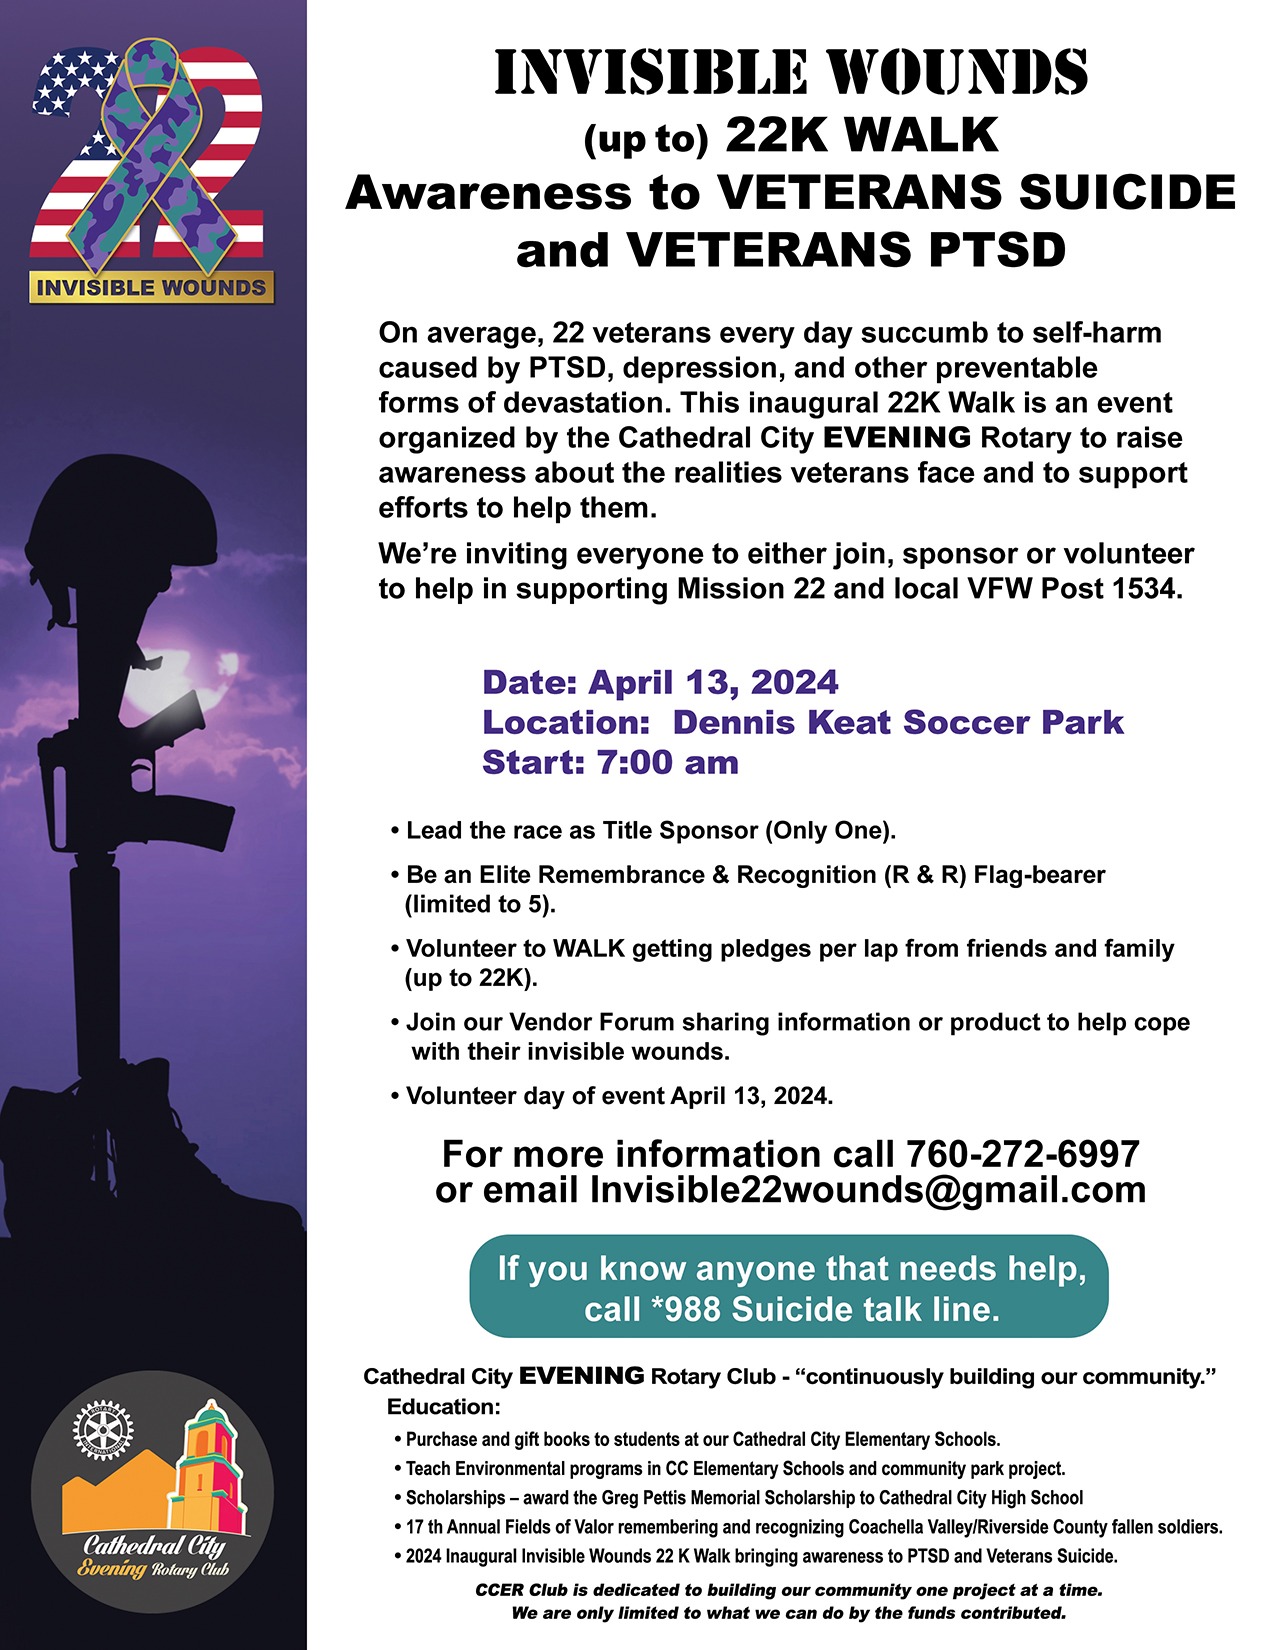 Invisible Wounds 22K Walk – Awareness for Veterans Suicide & PTSD